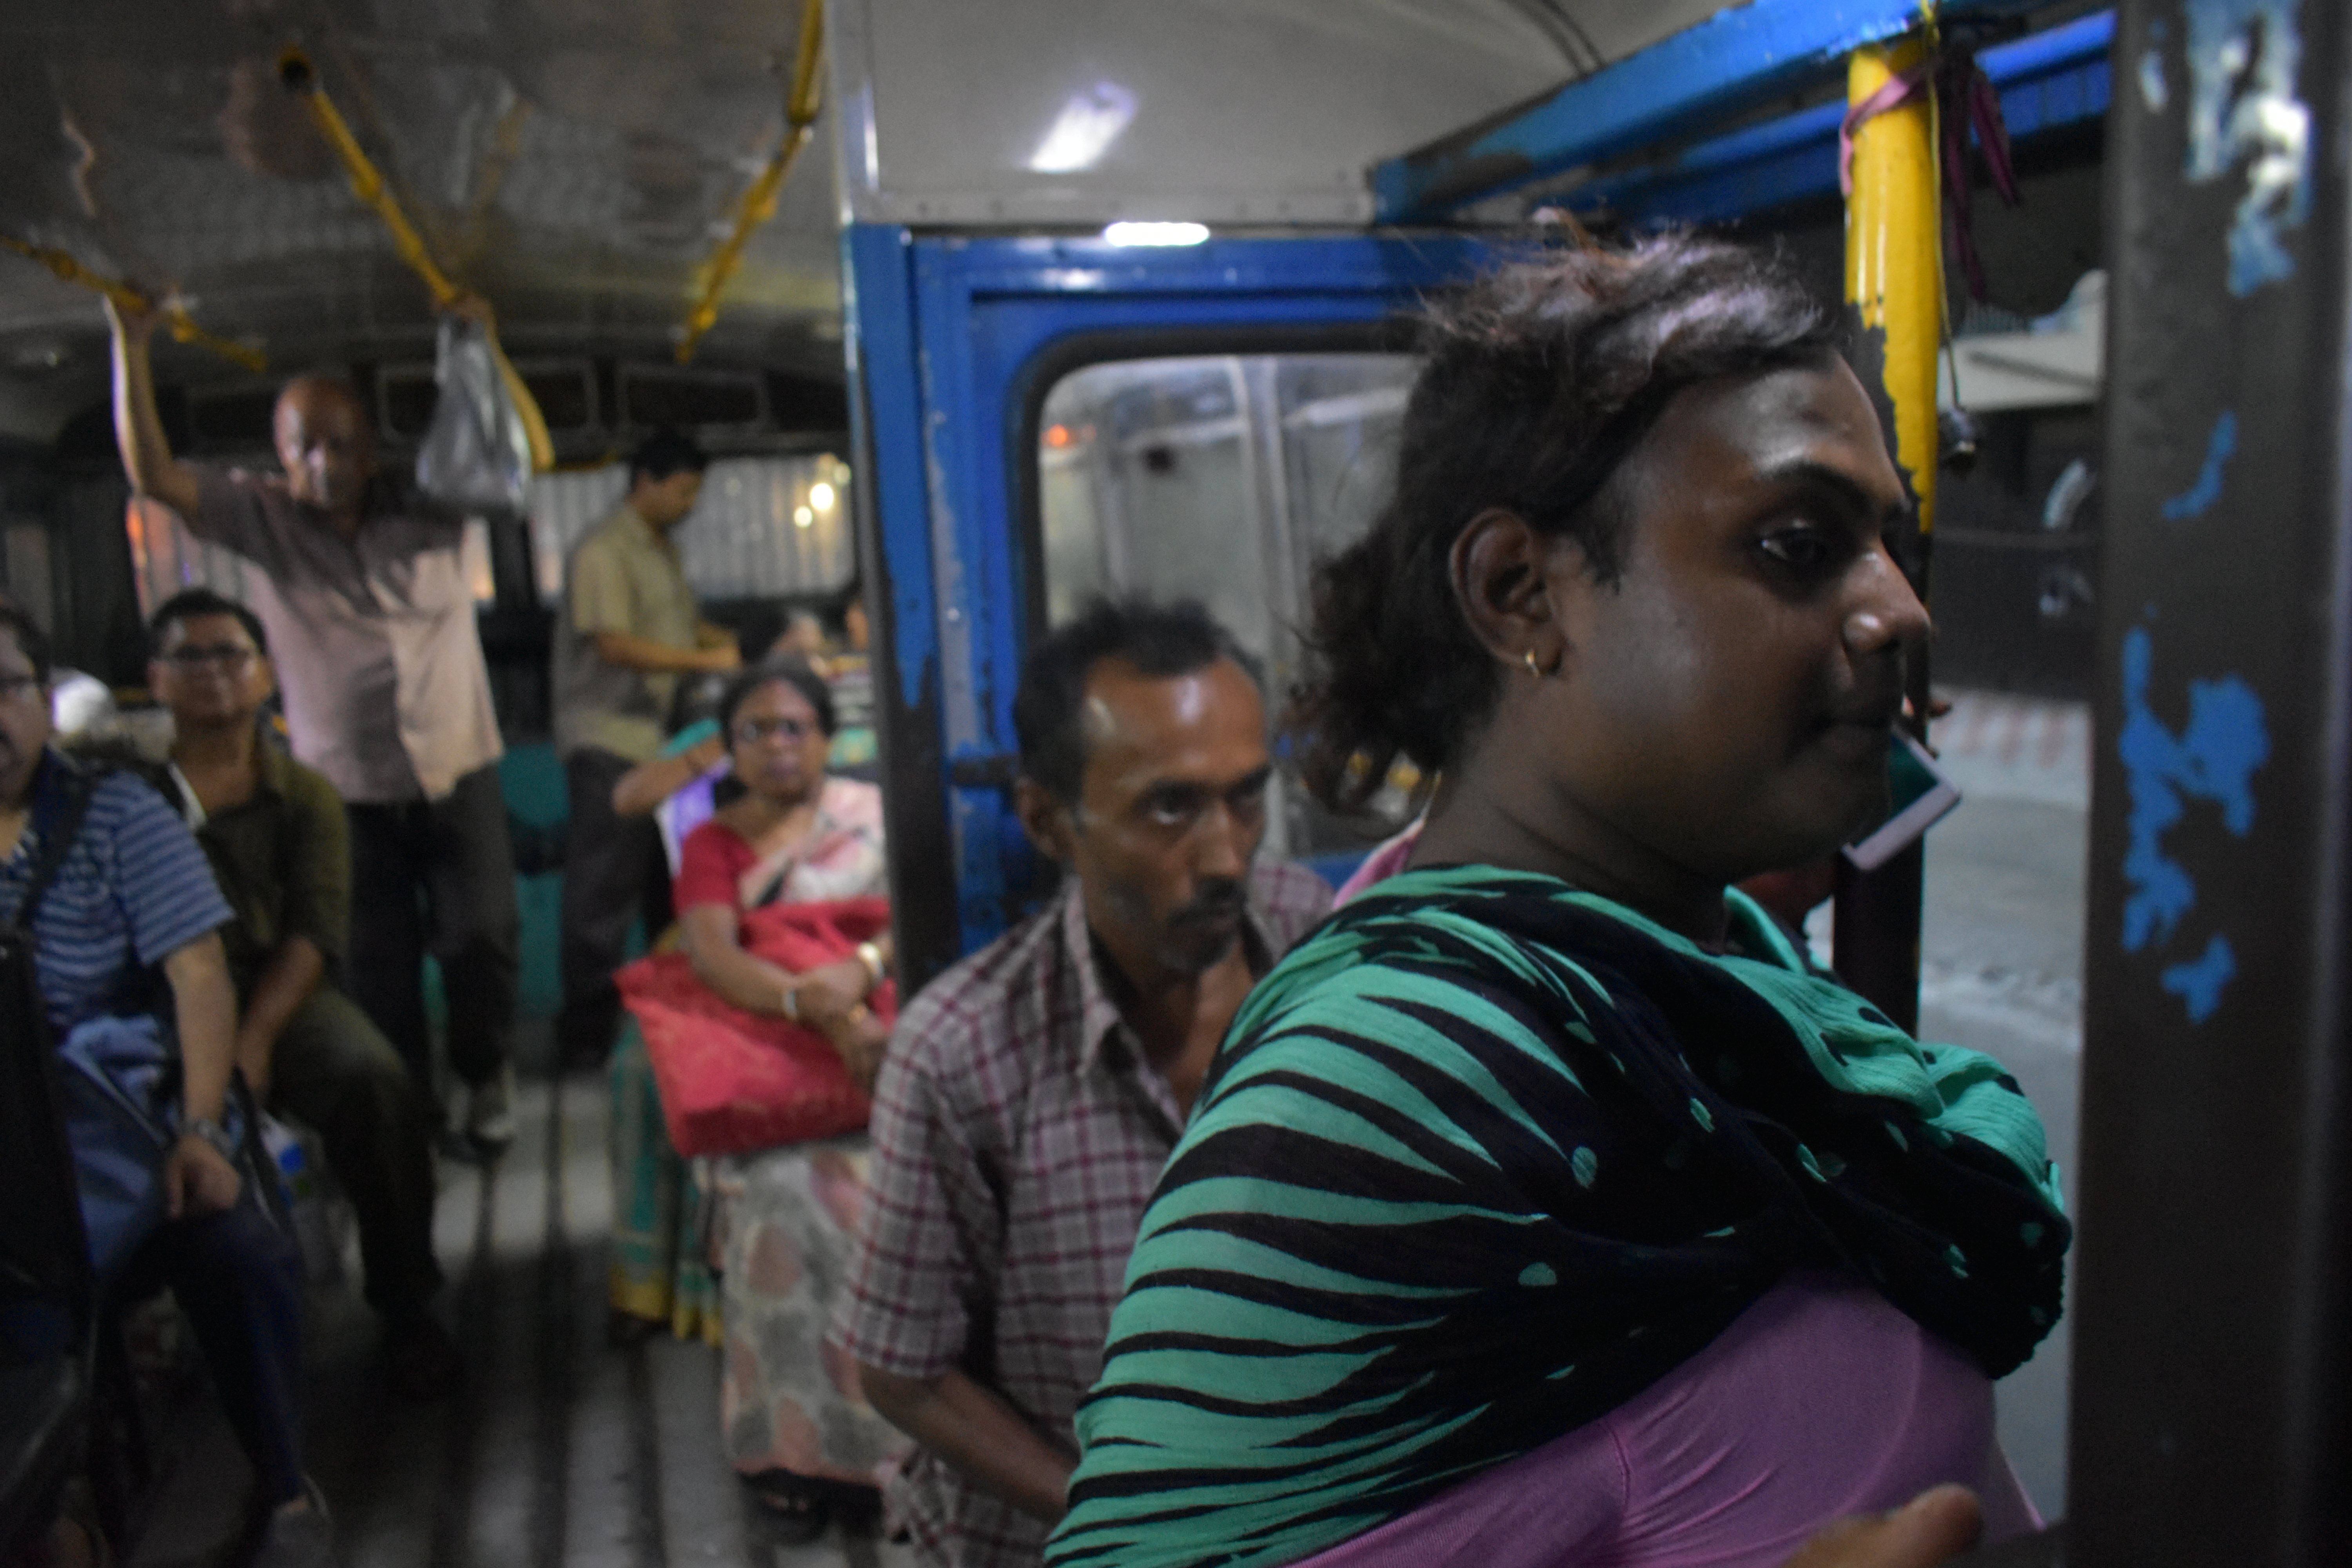 Sintu, like many transgender individuals, relies on street economies such as dancing for survival. Traveling all across Kolkata, she spends a large portion of her life on public transportation. Buses and trains across India are divided by gender with painted signs. There is only standing room on this bus, but she always sits in the "Gentlemen's" section. Image by Siyona Ravi. India, 2017.